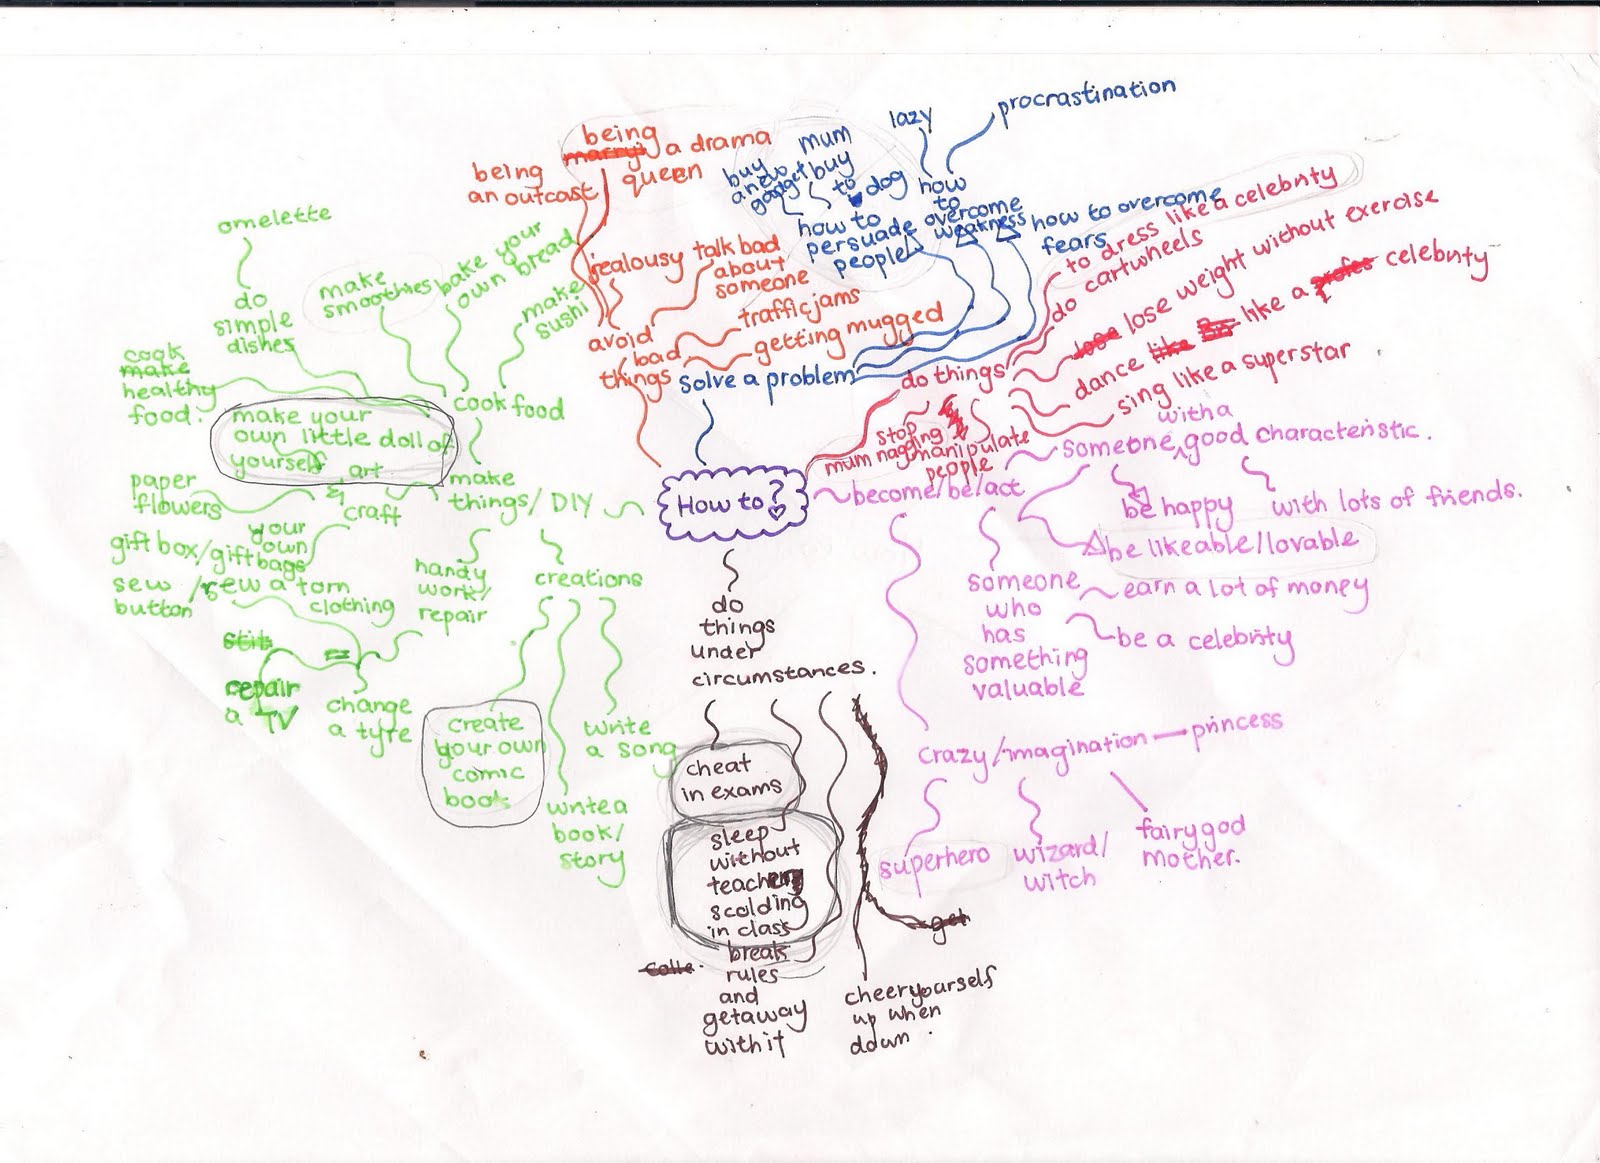 mind map brainstorm of 'how to' 001 Mind+map+brainstorm+of+%27how+to%27+001